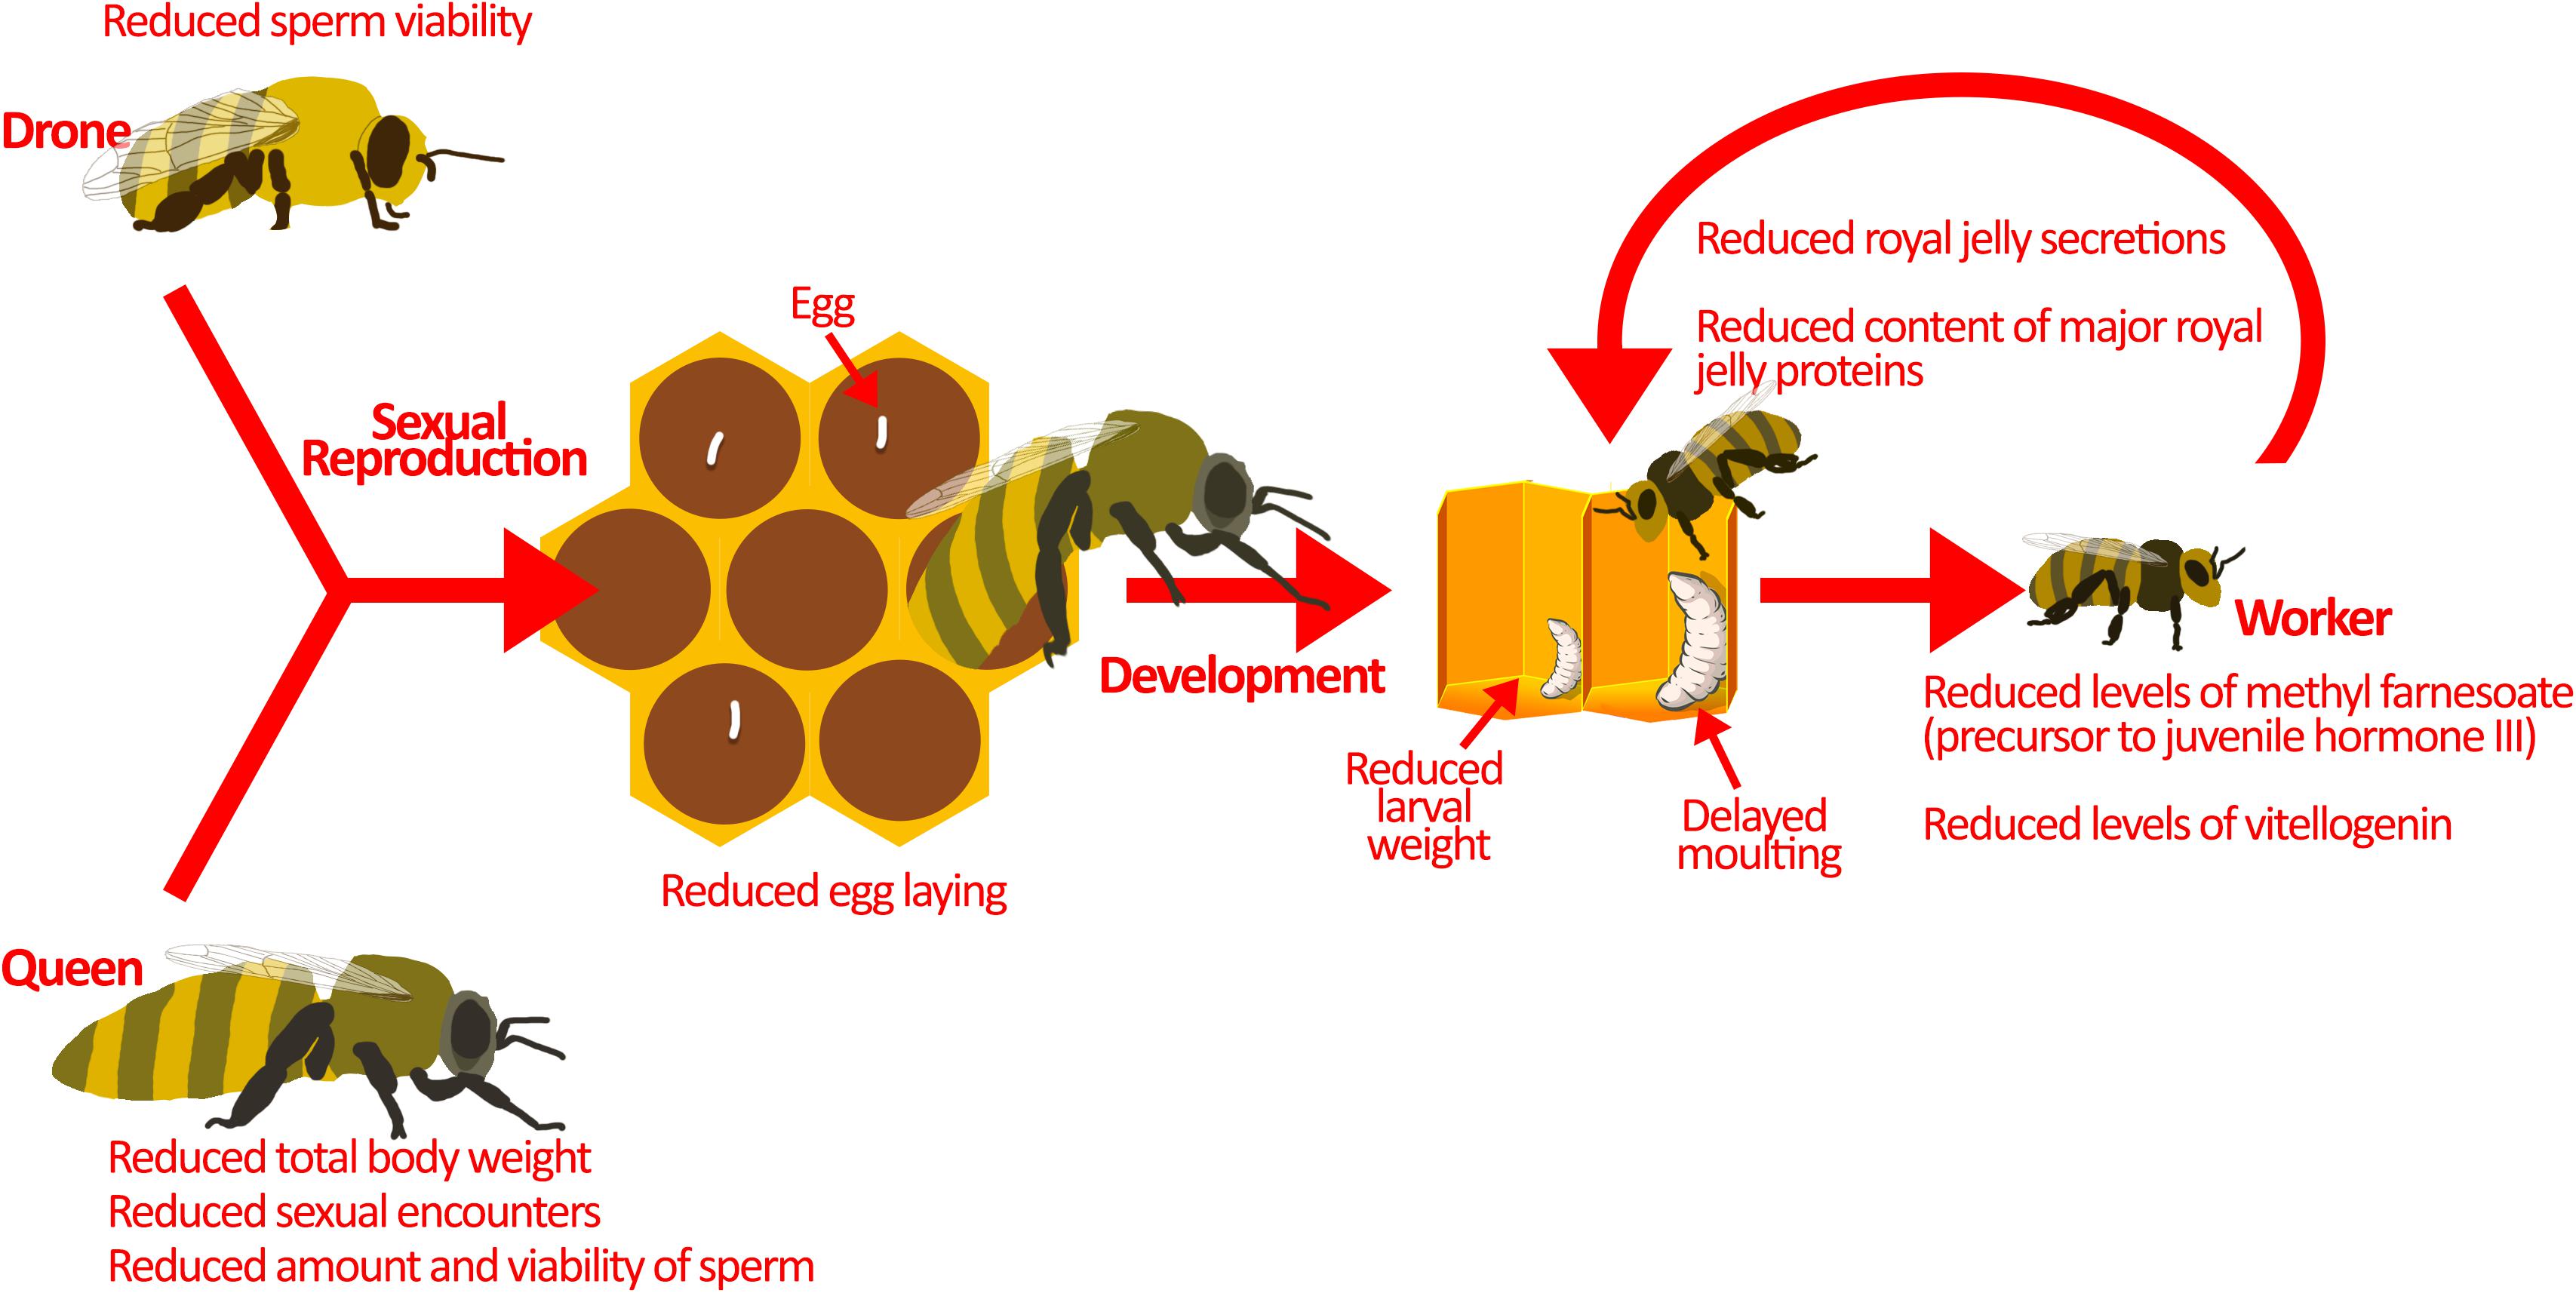 Heatwave-like events affect drone production and brood-care behaviour in  bumblebees [PeerJ]